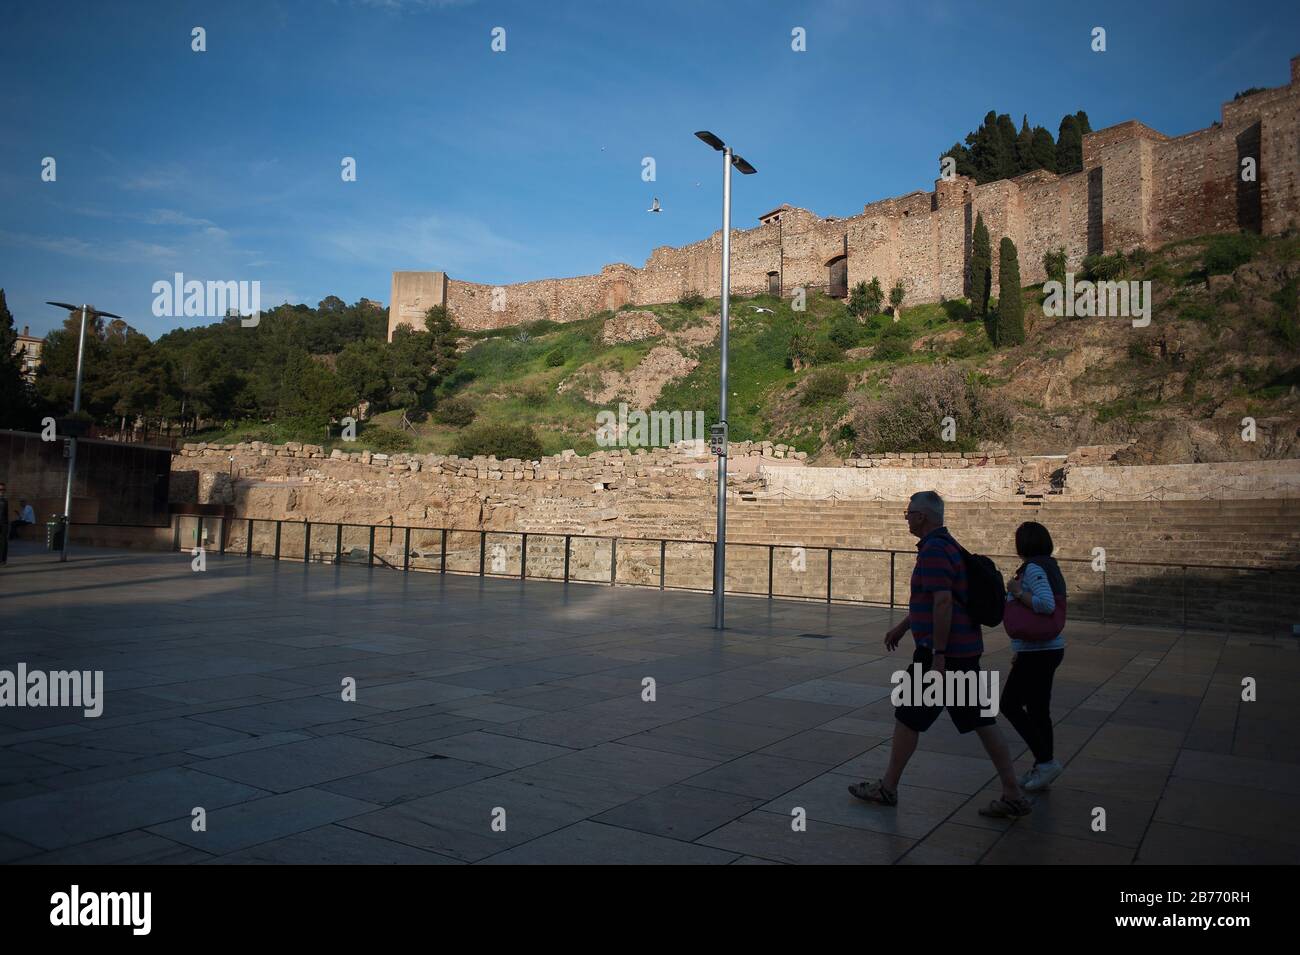 Malaga, Spain. 13th Mar, 2020. People walk on the street as the facade of Roman theatre is being closed to visitors.Spanish Prime Minister Pedro Sánchez has declared the emergency state in Spain because of Covid-19 outbreak, after the raise of number of cases of people infected with Covid-19 in the country. Spanish authorities have closed museums and monuments to control the expansion of Covid-19 outbreak. The city of Malaga is the first in Andalusia with the most number of people infected. Credit: SOPA Images Limited/Alamy Live News Stock Photo